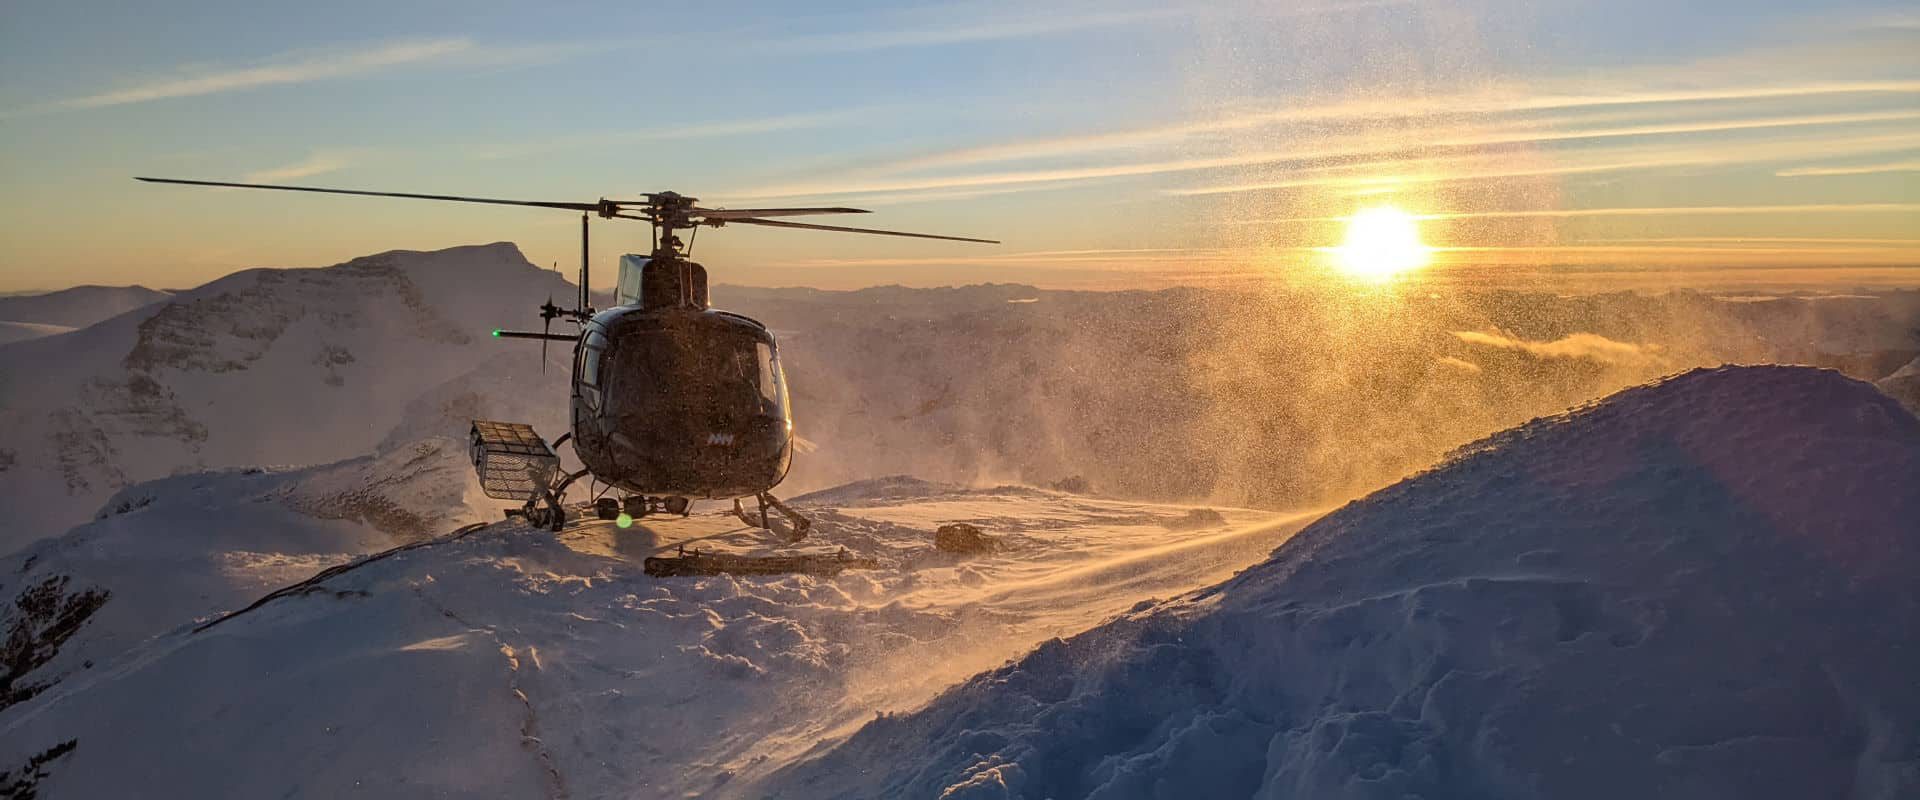 Photo by helicopter pilot Jeff Coenen early morning sunrise